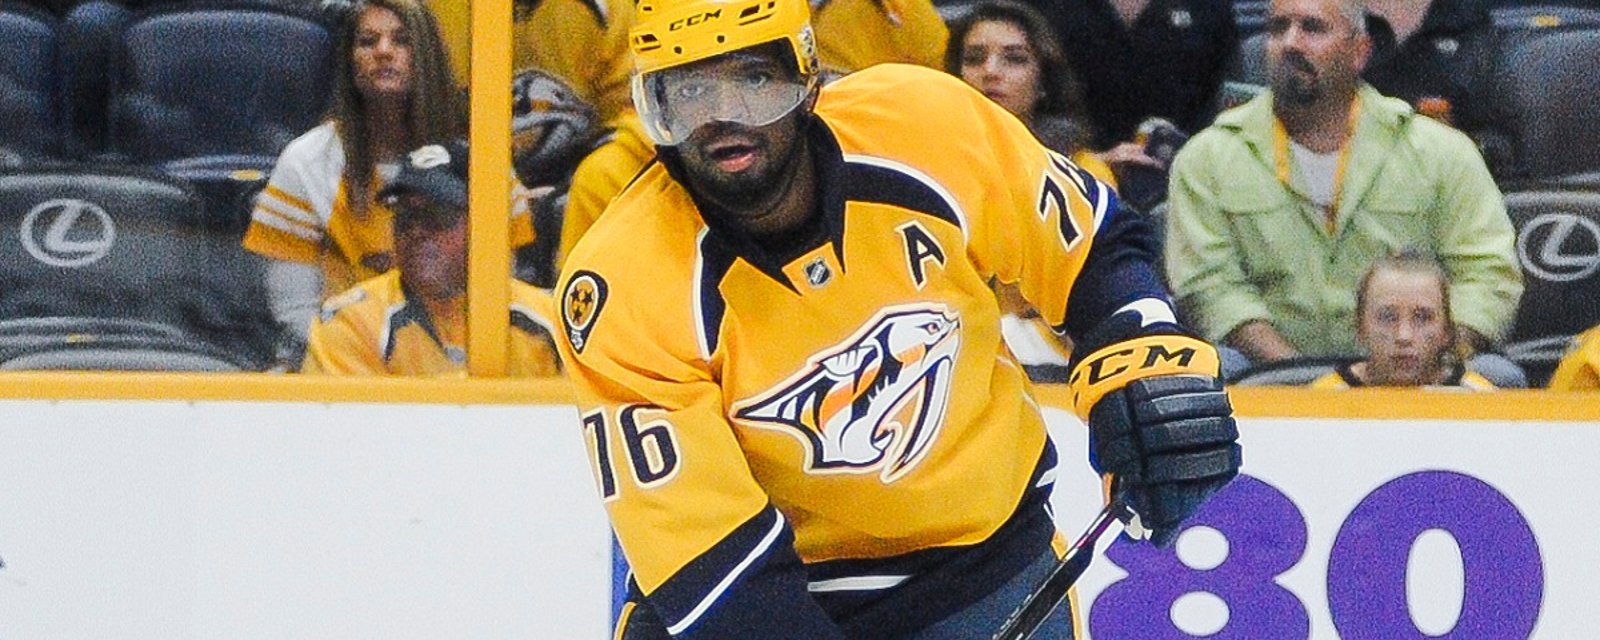 Report: P.K. Subban will miss multiple games due to injury.